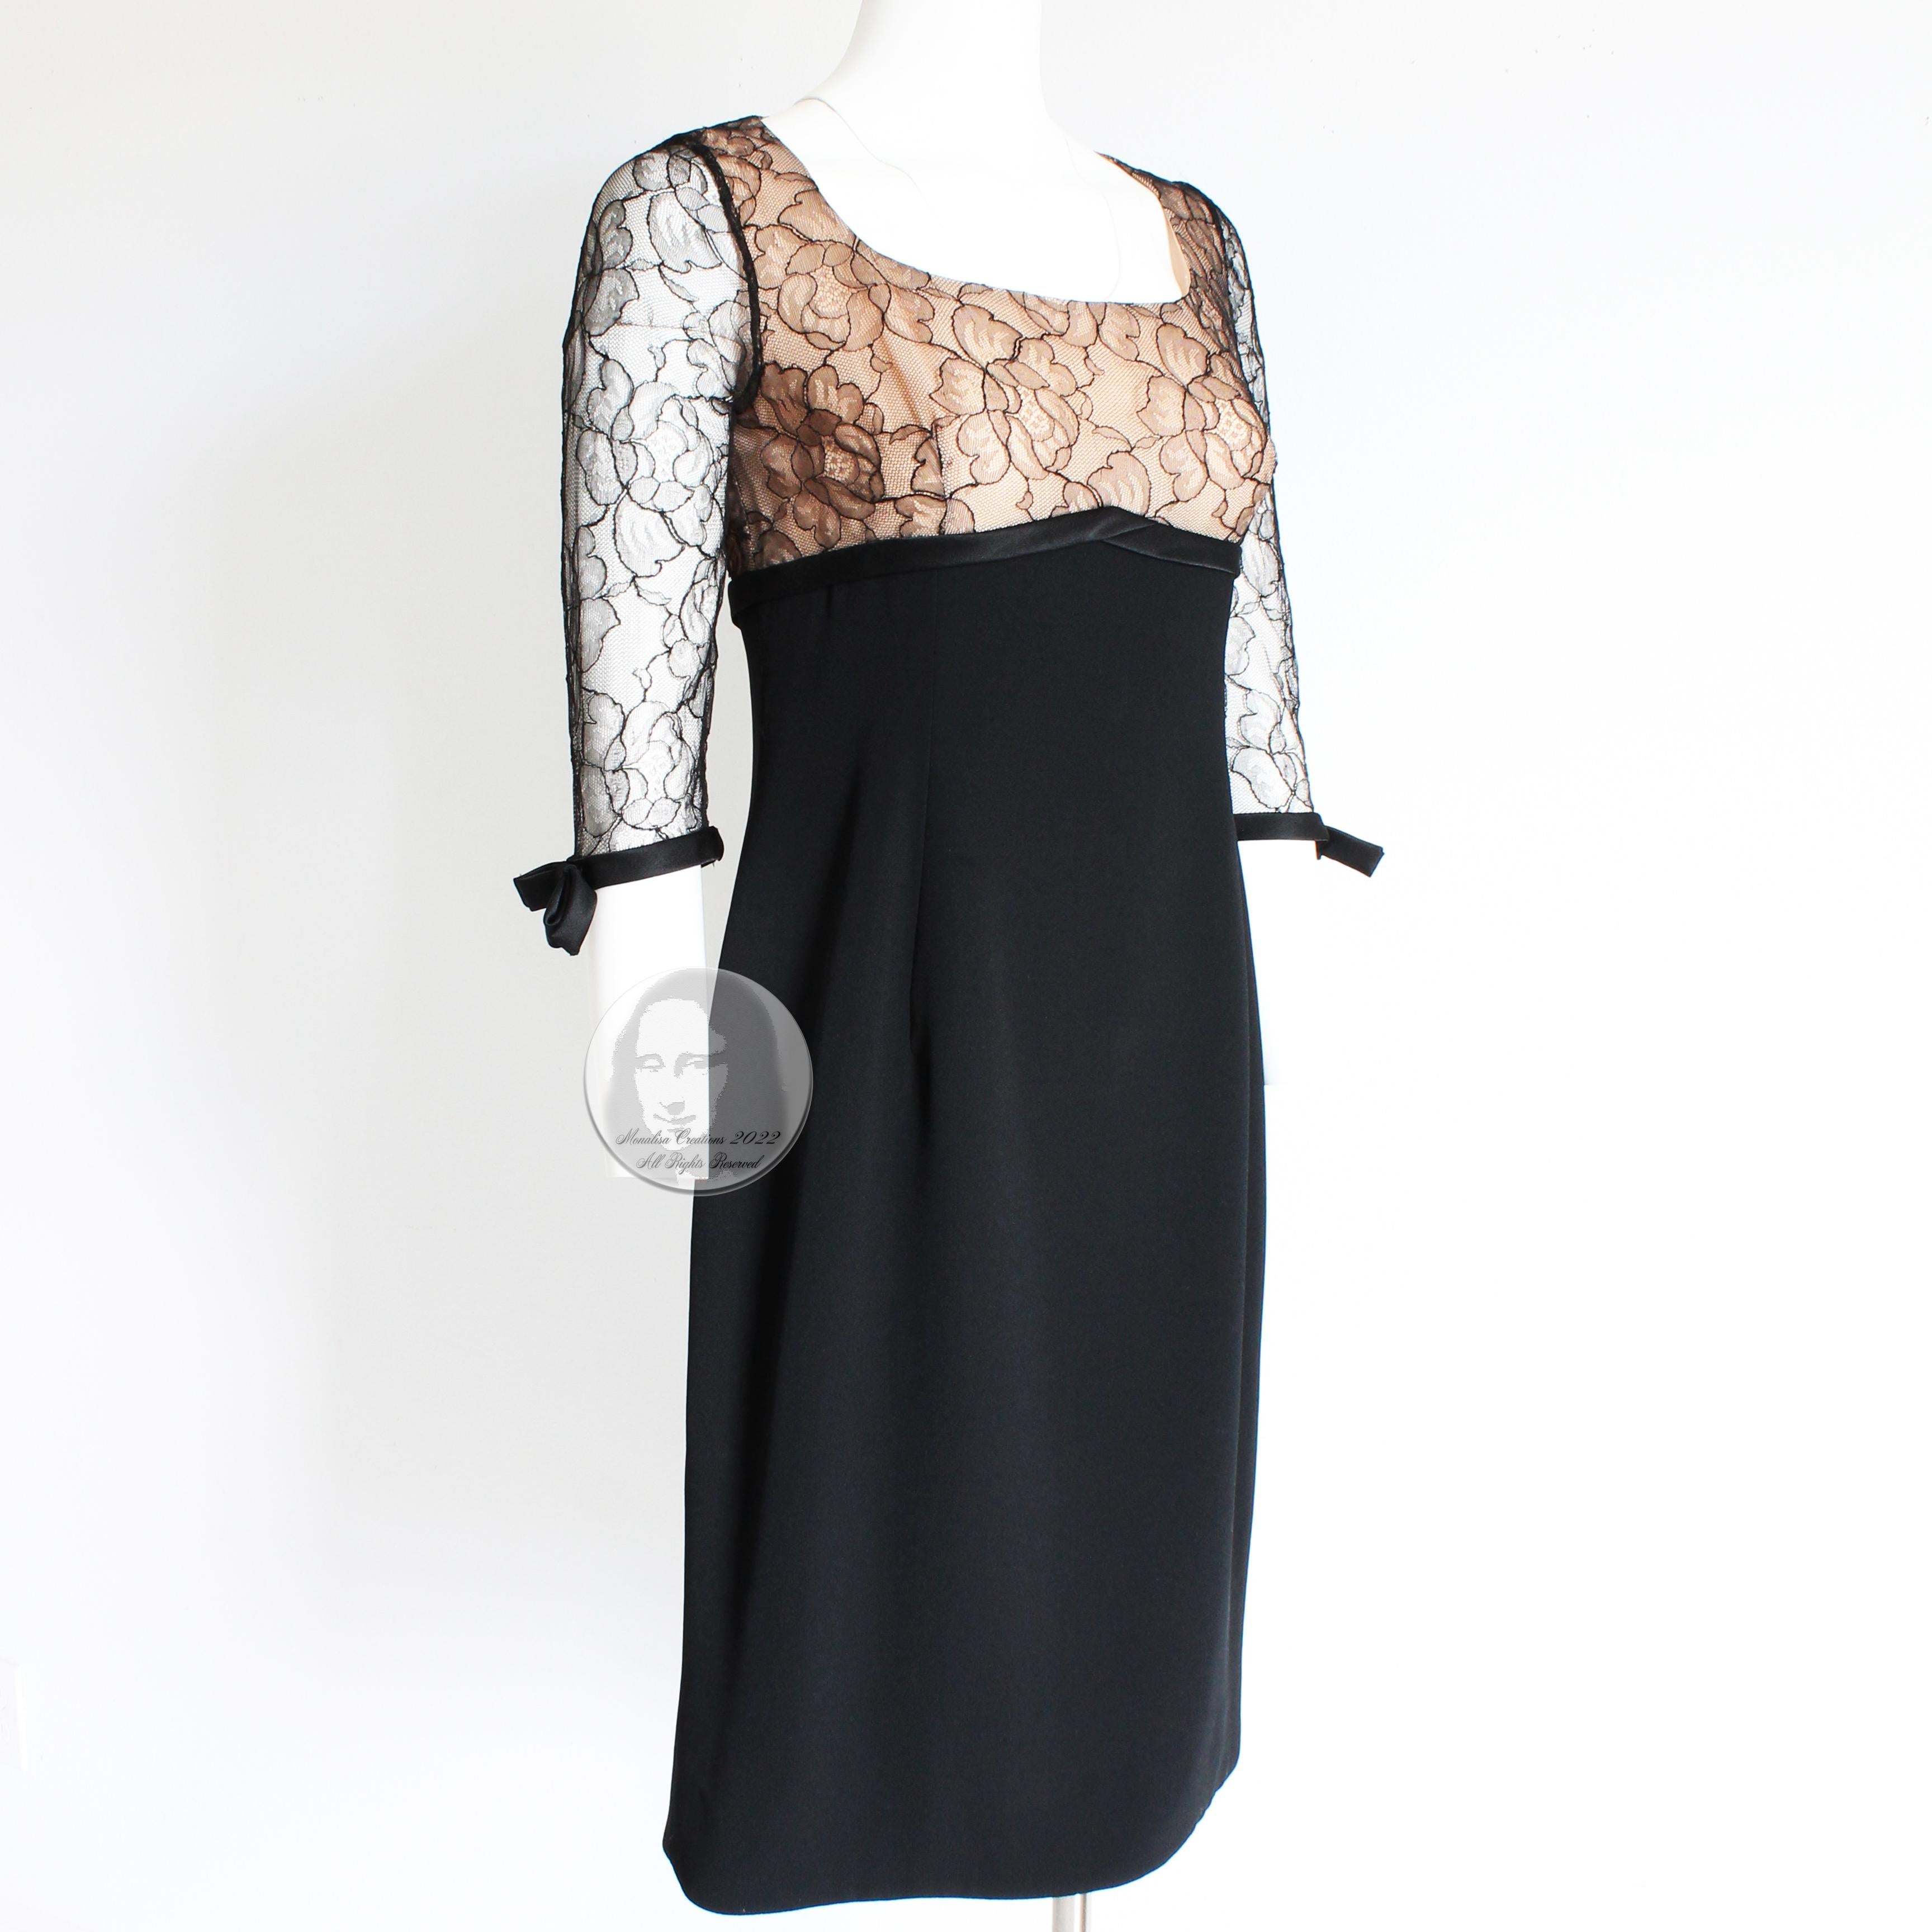 Travilla Cocktail Dress Black Illusion Lace Silk Ribbon Trim Size S Vintage 60s In Good Condition For Sale In Port Saint Lucie, FL